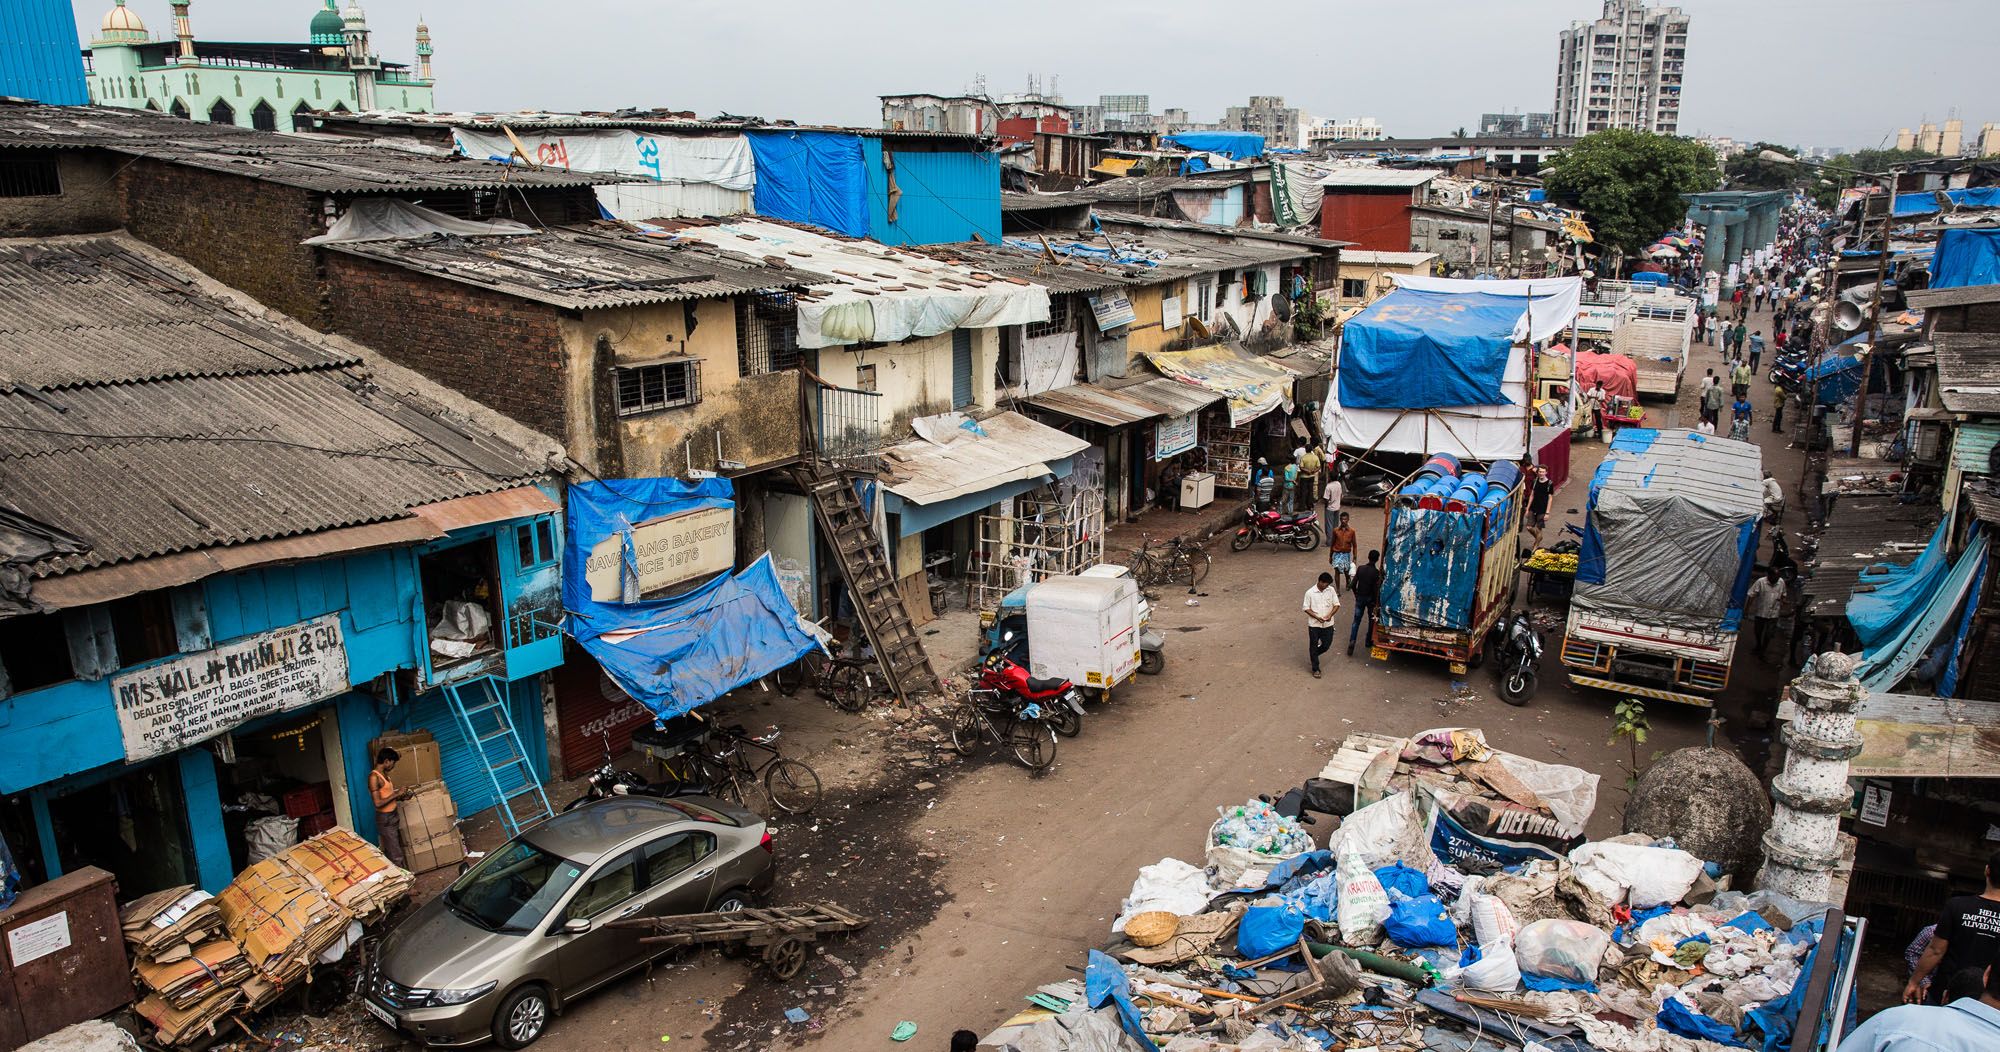 Featured image for “A Tour of the Dharavi Slum in Mumbai, India”